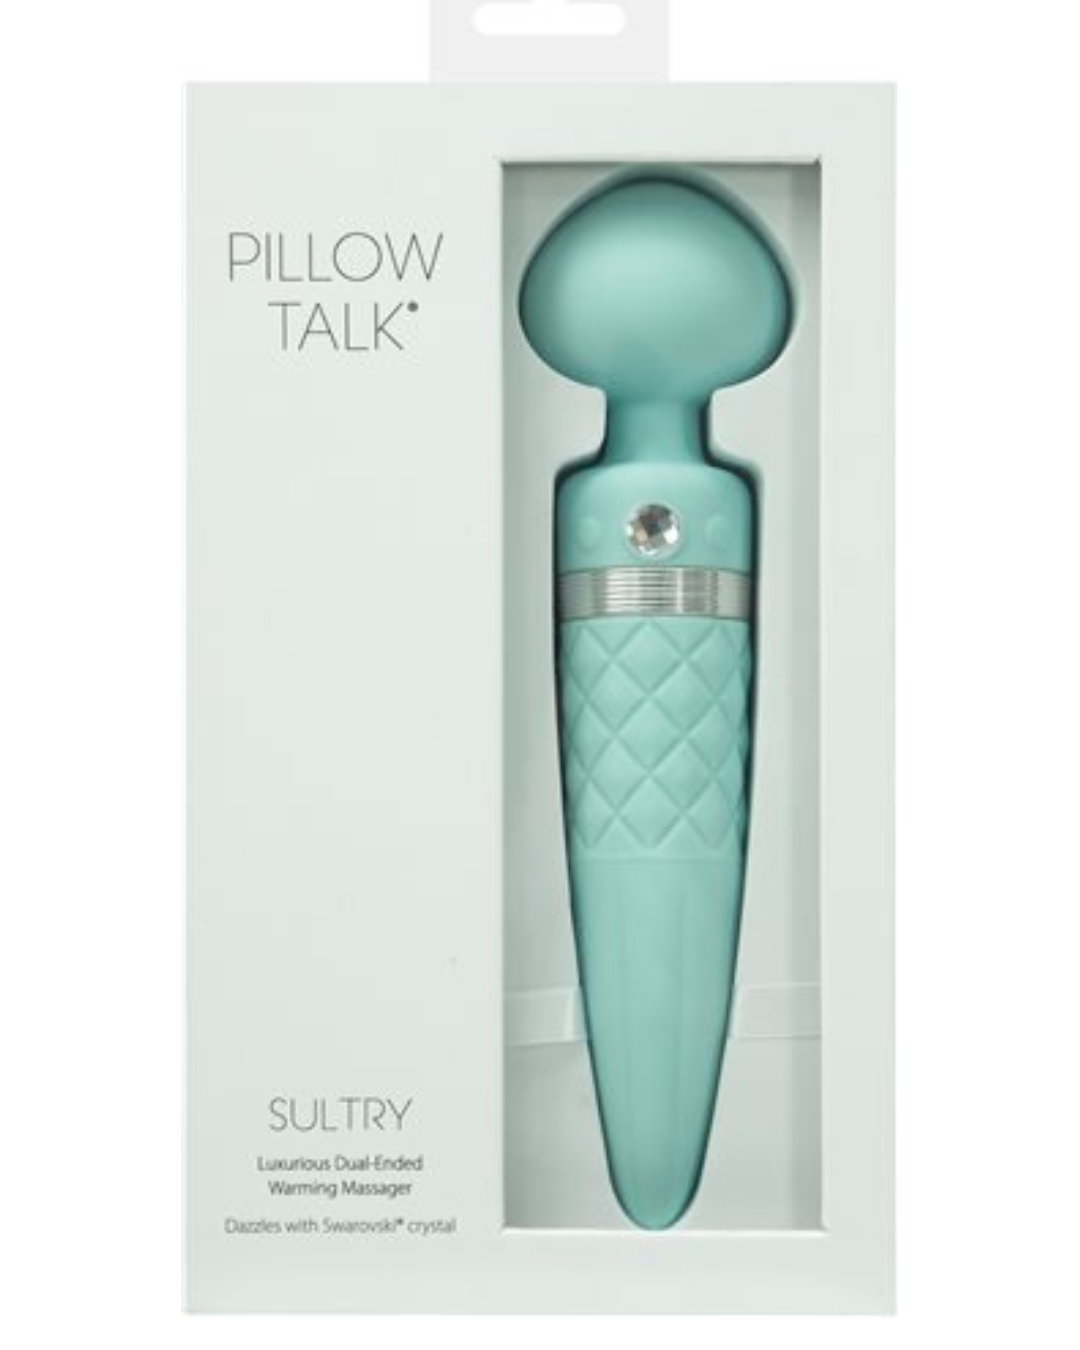 Pillow Talk Sultry Waterproof Double Ended Wand Vibrator - Teal box